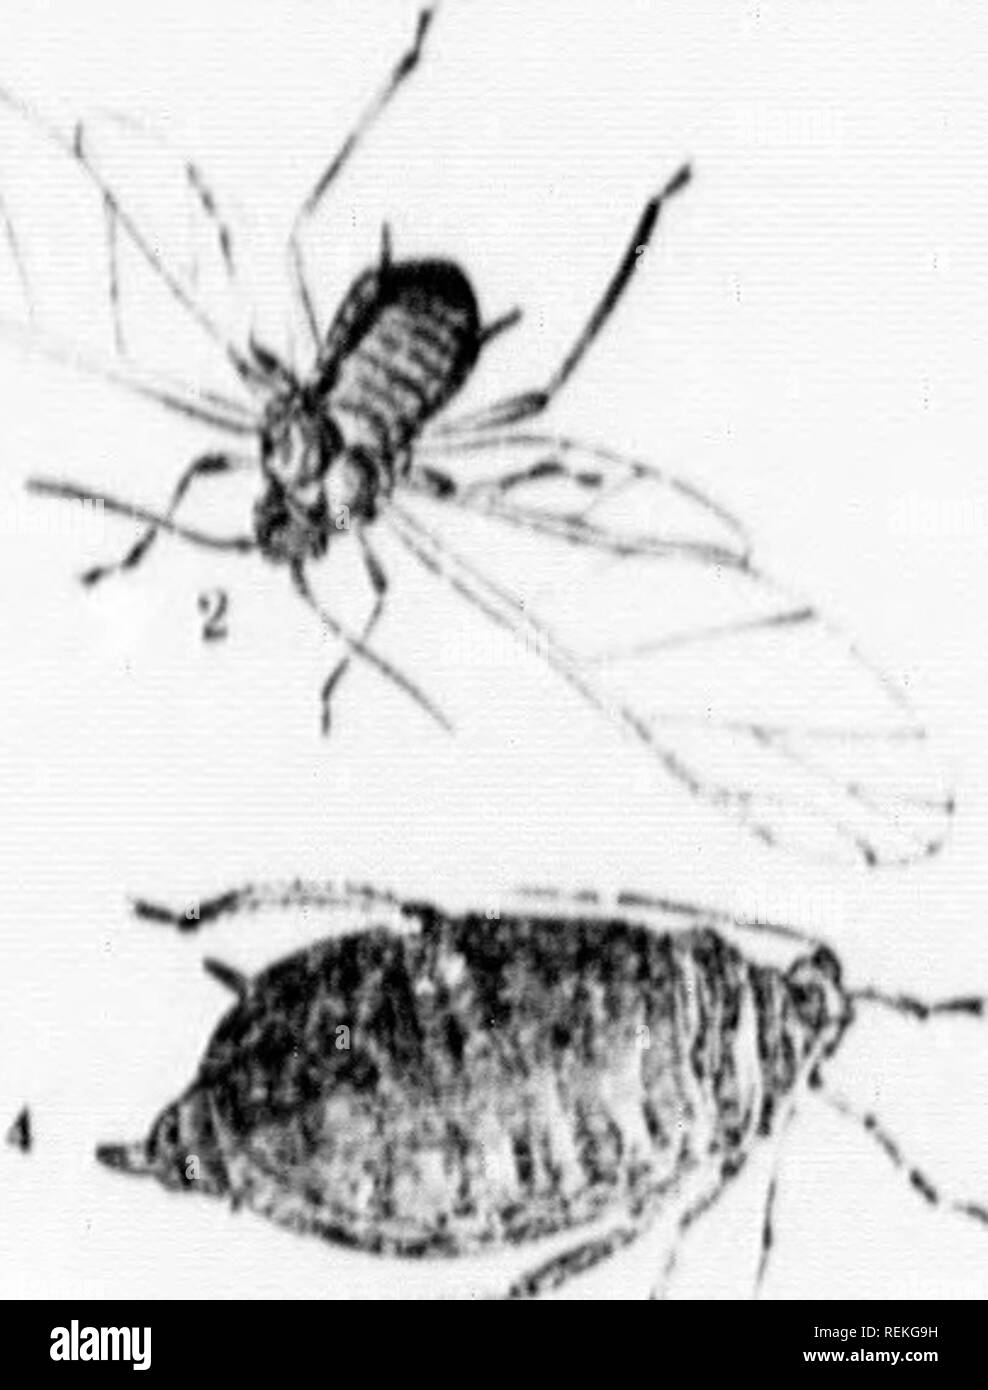 . Recent additions to the list of injurious insects of Canada [microform]. Insects pests; Agricultural pests; Insectes nuisibles; Ennemis des cultures. li'. â,,,â,âlM/..'Hn.l.'i.laWea. llic tont in Caiwi.Ui. A lew yÂ»MU's ivjro (IHO'i). hÂ«)Wovcr,ivuotl&quot;i't wâH nui.lo to i,.tn&gt;.l...-o ilorHo HouKH into cuUivalion for uso !is!iliiu'i&gt;lyÂ»'Â«'VÂ«^&quot;&quot;&quot;'*^'&quot;^'^'''' pl-int It wivsnotl()i&gt;i,'(lÂ«''-^) l,oto,vtlu.vvoll known lu'Hl of ,1,.. Uro:ul aiwl ll'-rsc Bc-iins, th.-'Uhuk iÂ»..ii.irm&quot;nfr,n2:- lish t:irn&gt; r., nni.io it. ai^lK-iir- ,^â(,e. :ina was ono d t Stock Photo